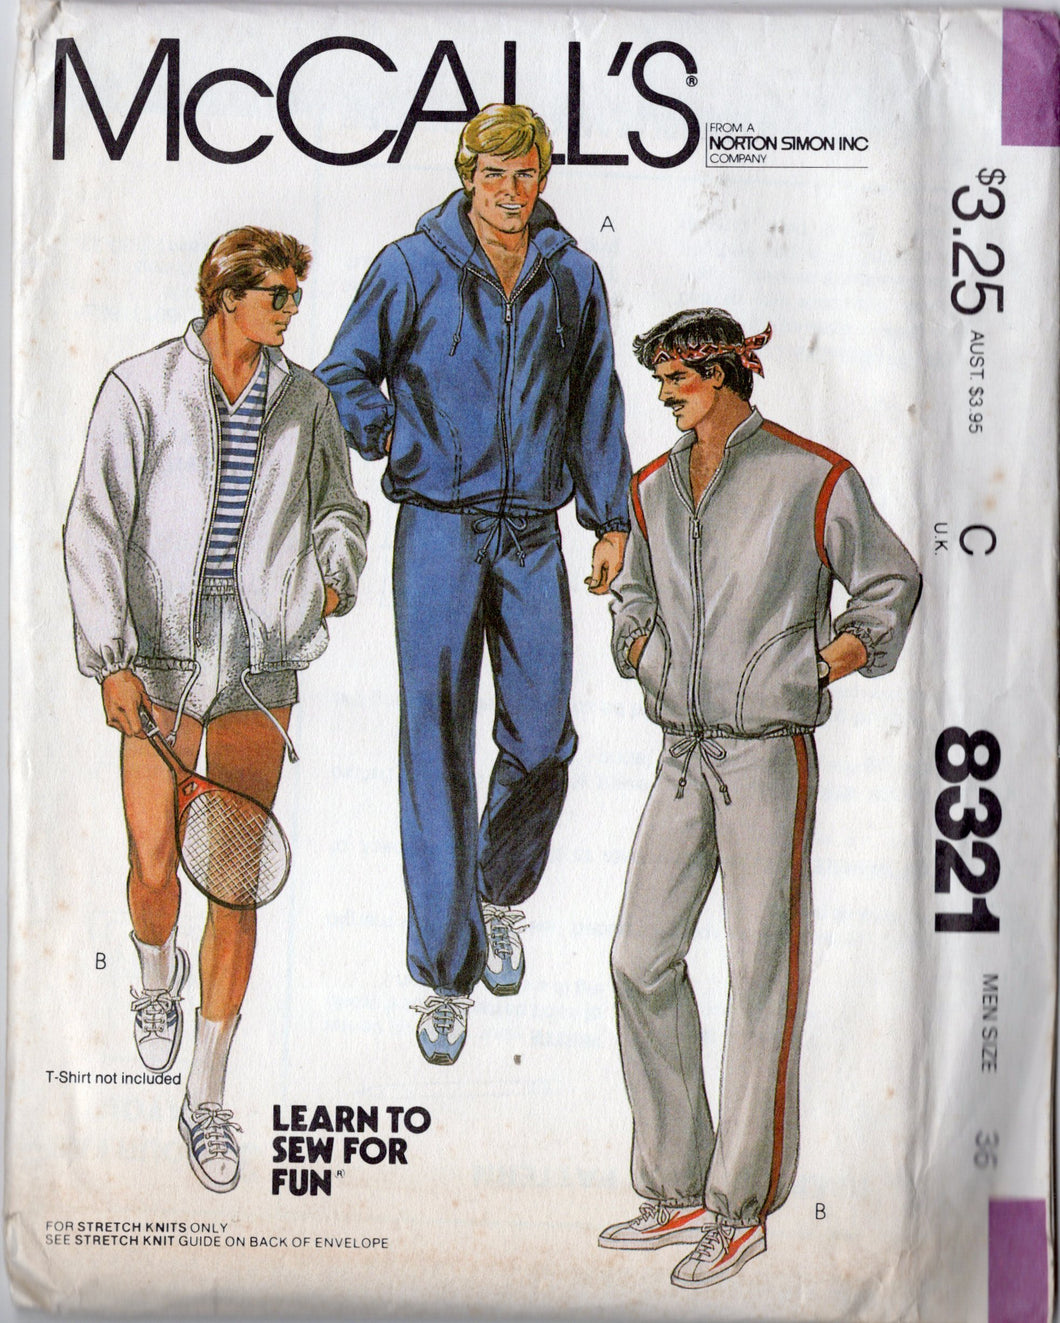 1980's McCall's Men's Workout Outfit including Jacket, Pants and Shorts Pattern - Chest 36